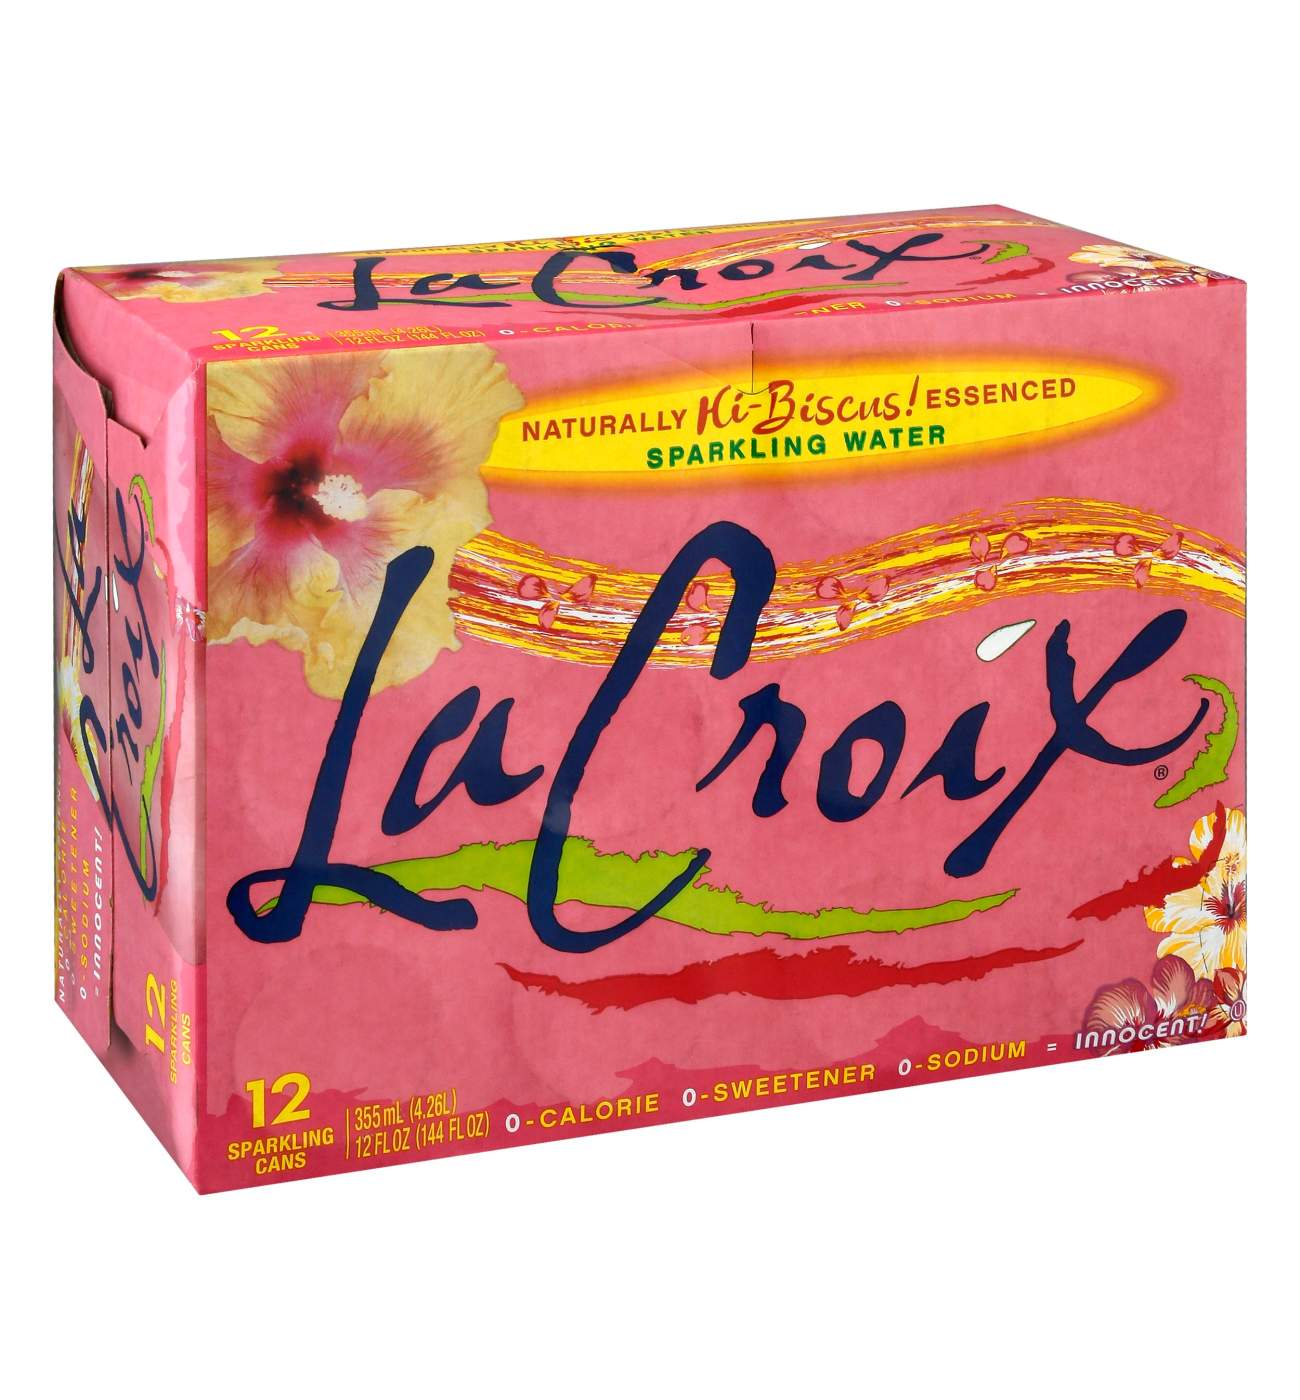 LaCroix Hi-Biscus Sparkling Water 12 oz Cans; image 1 of 2